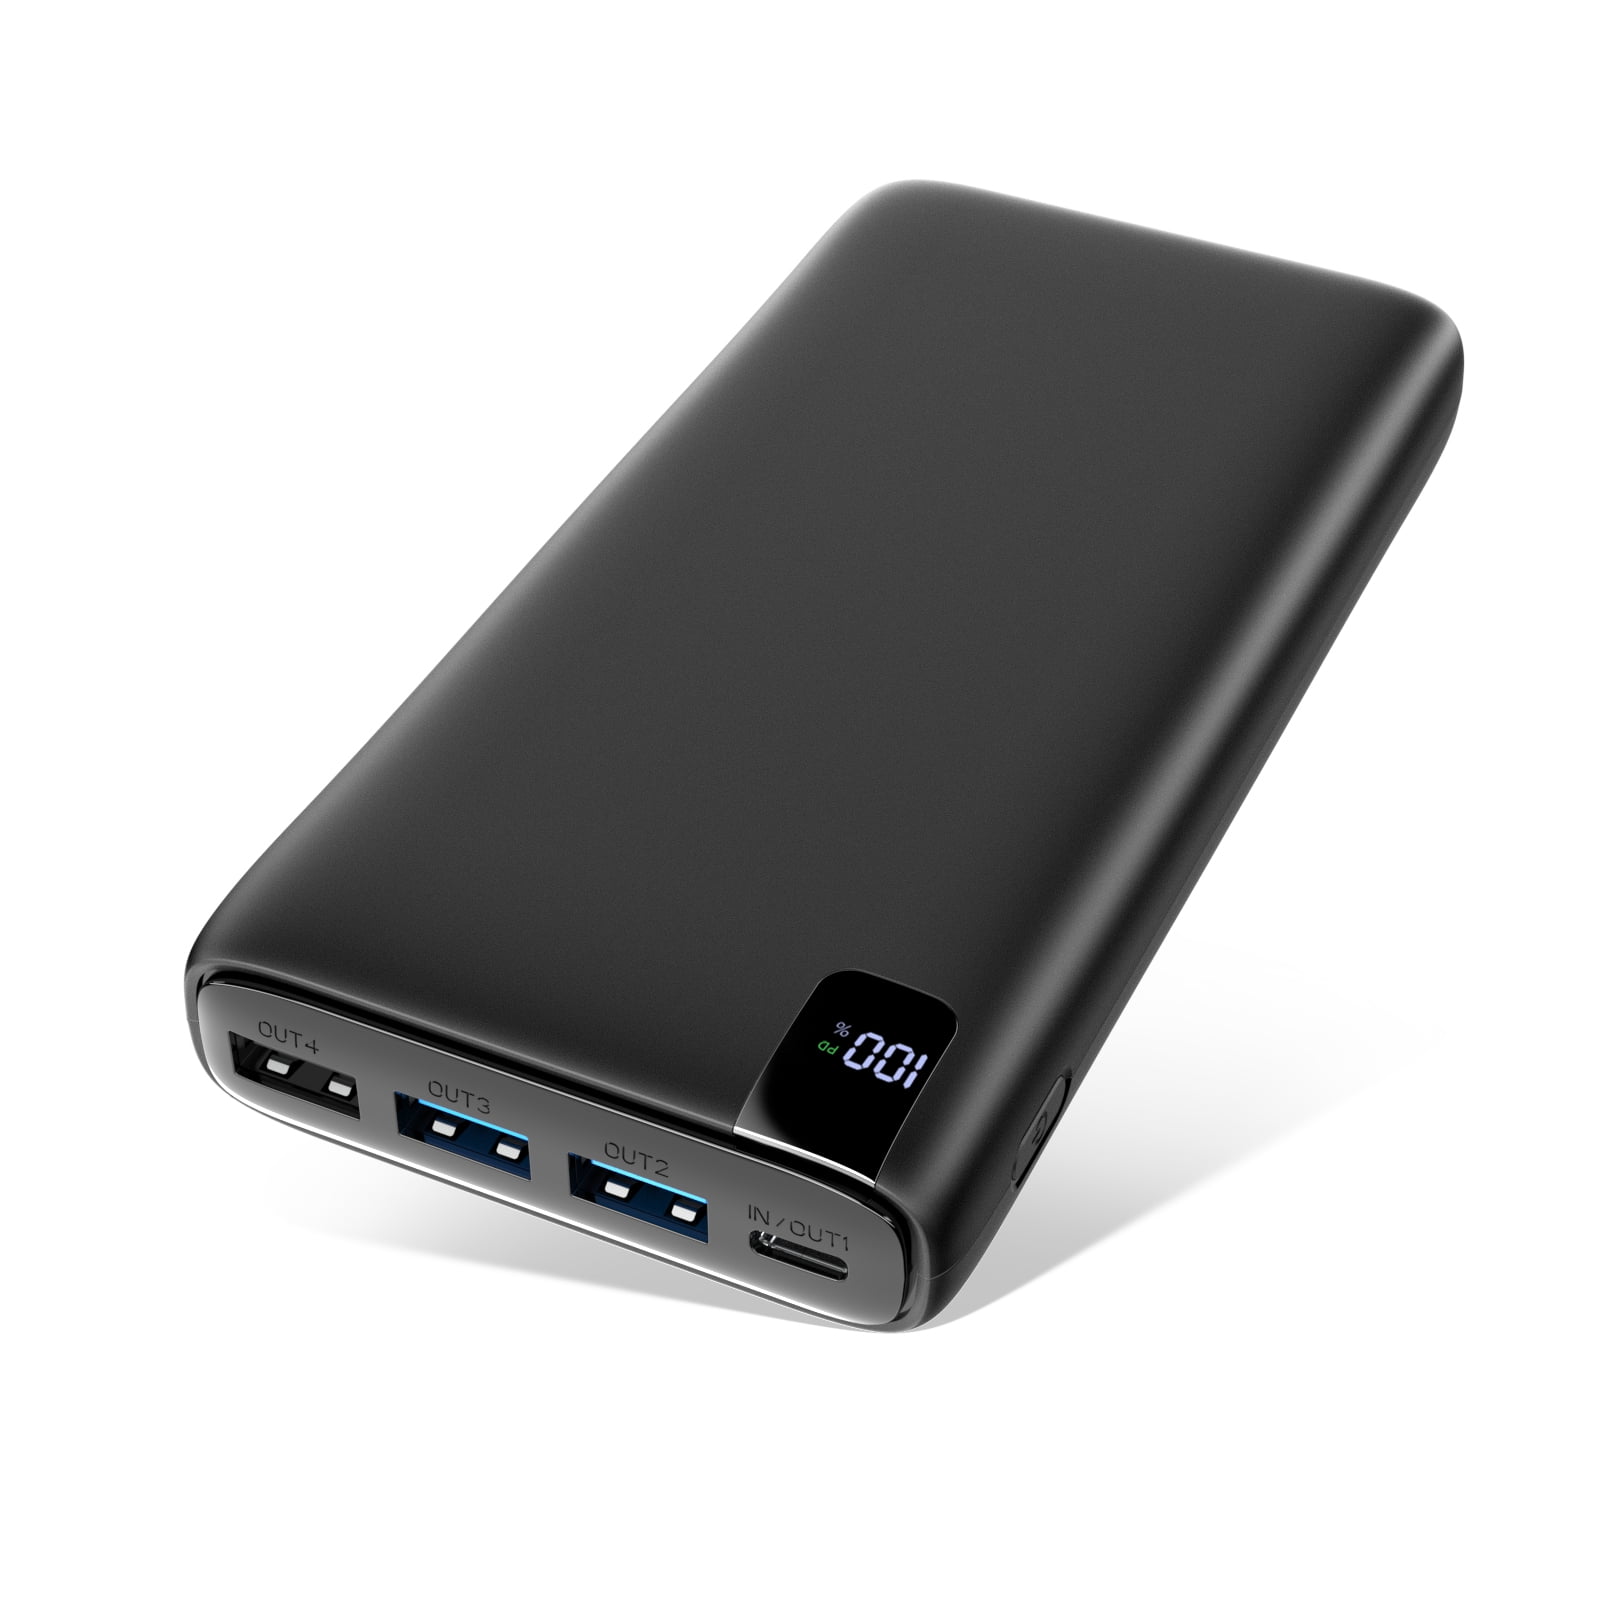 Hiluckey Portable Charger Power Bank 27,000mAh, 22.5W Fast